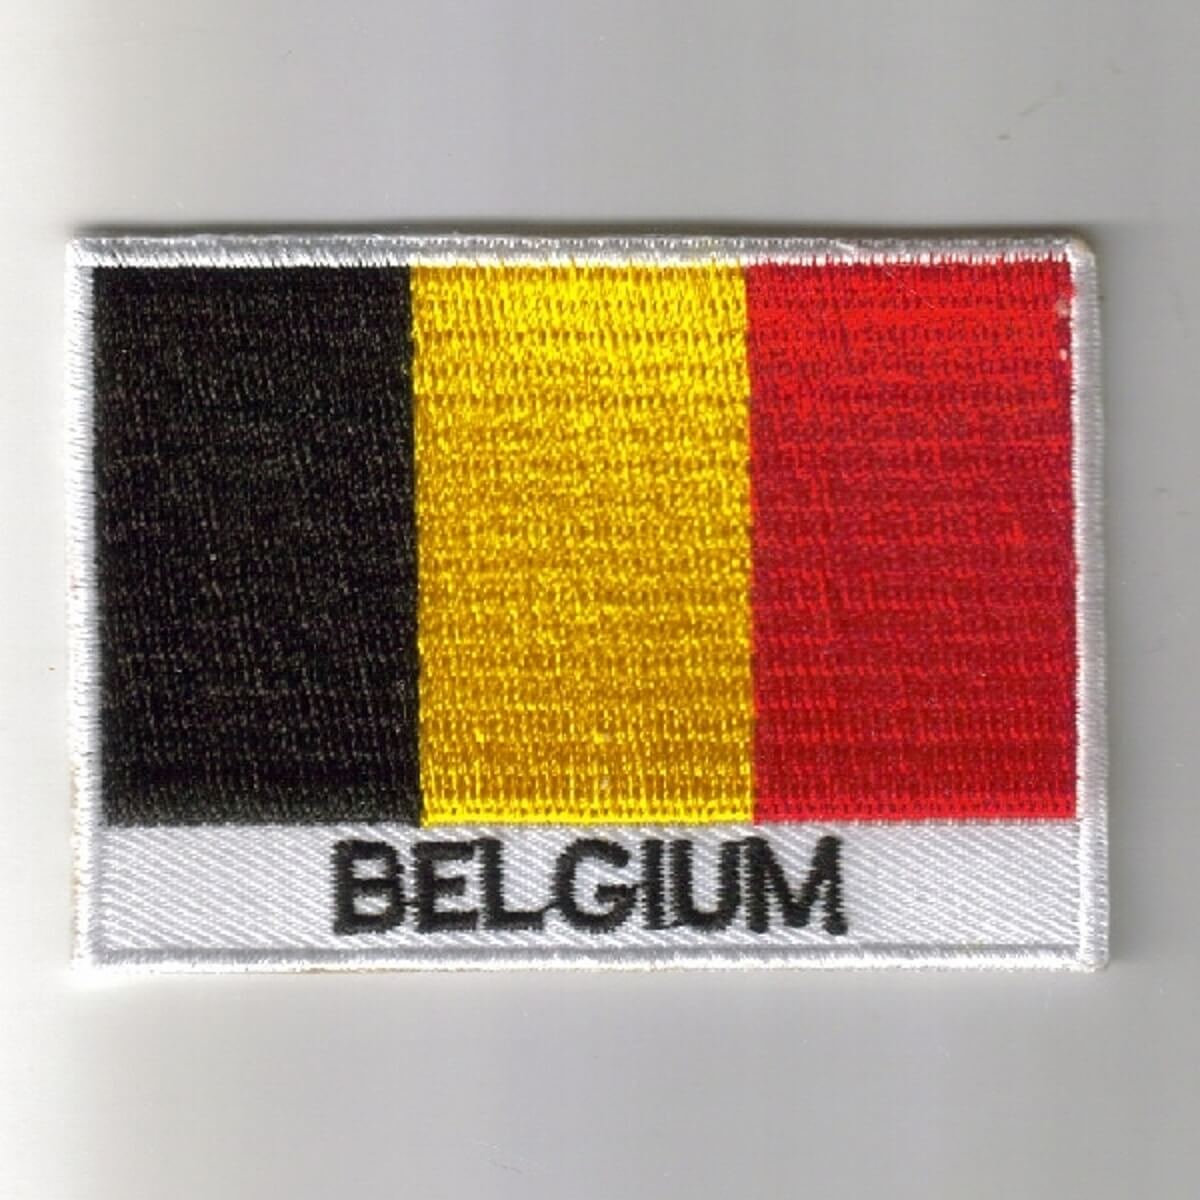 Belgium embroidered patches - Country flag Belgium patches / iron on badges